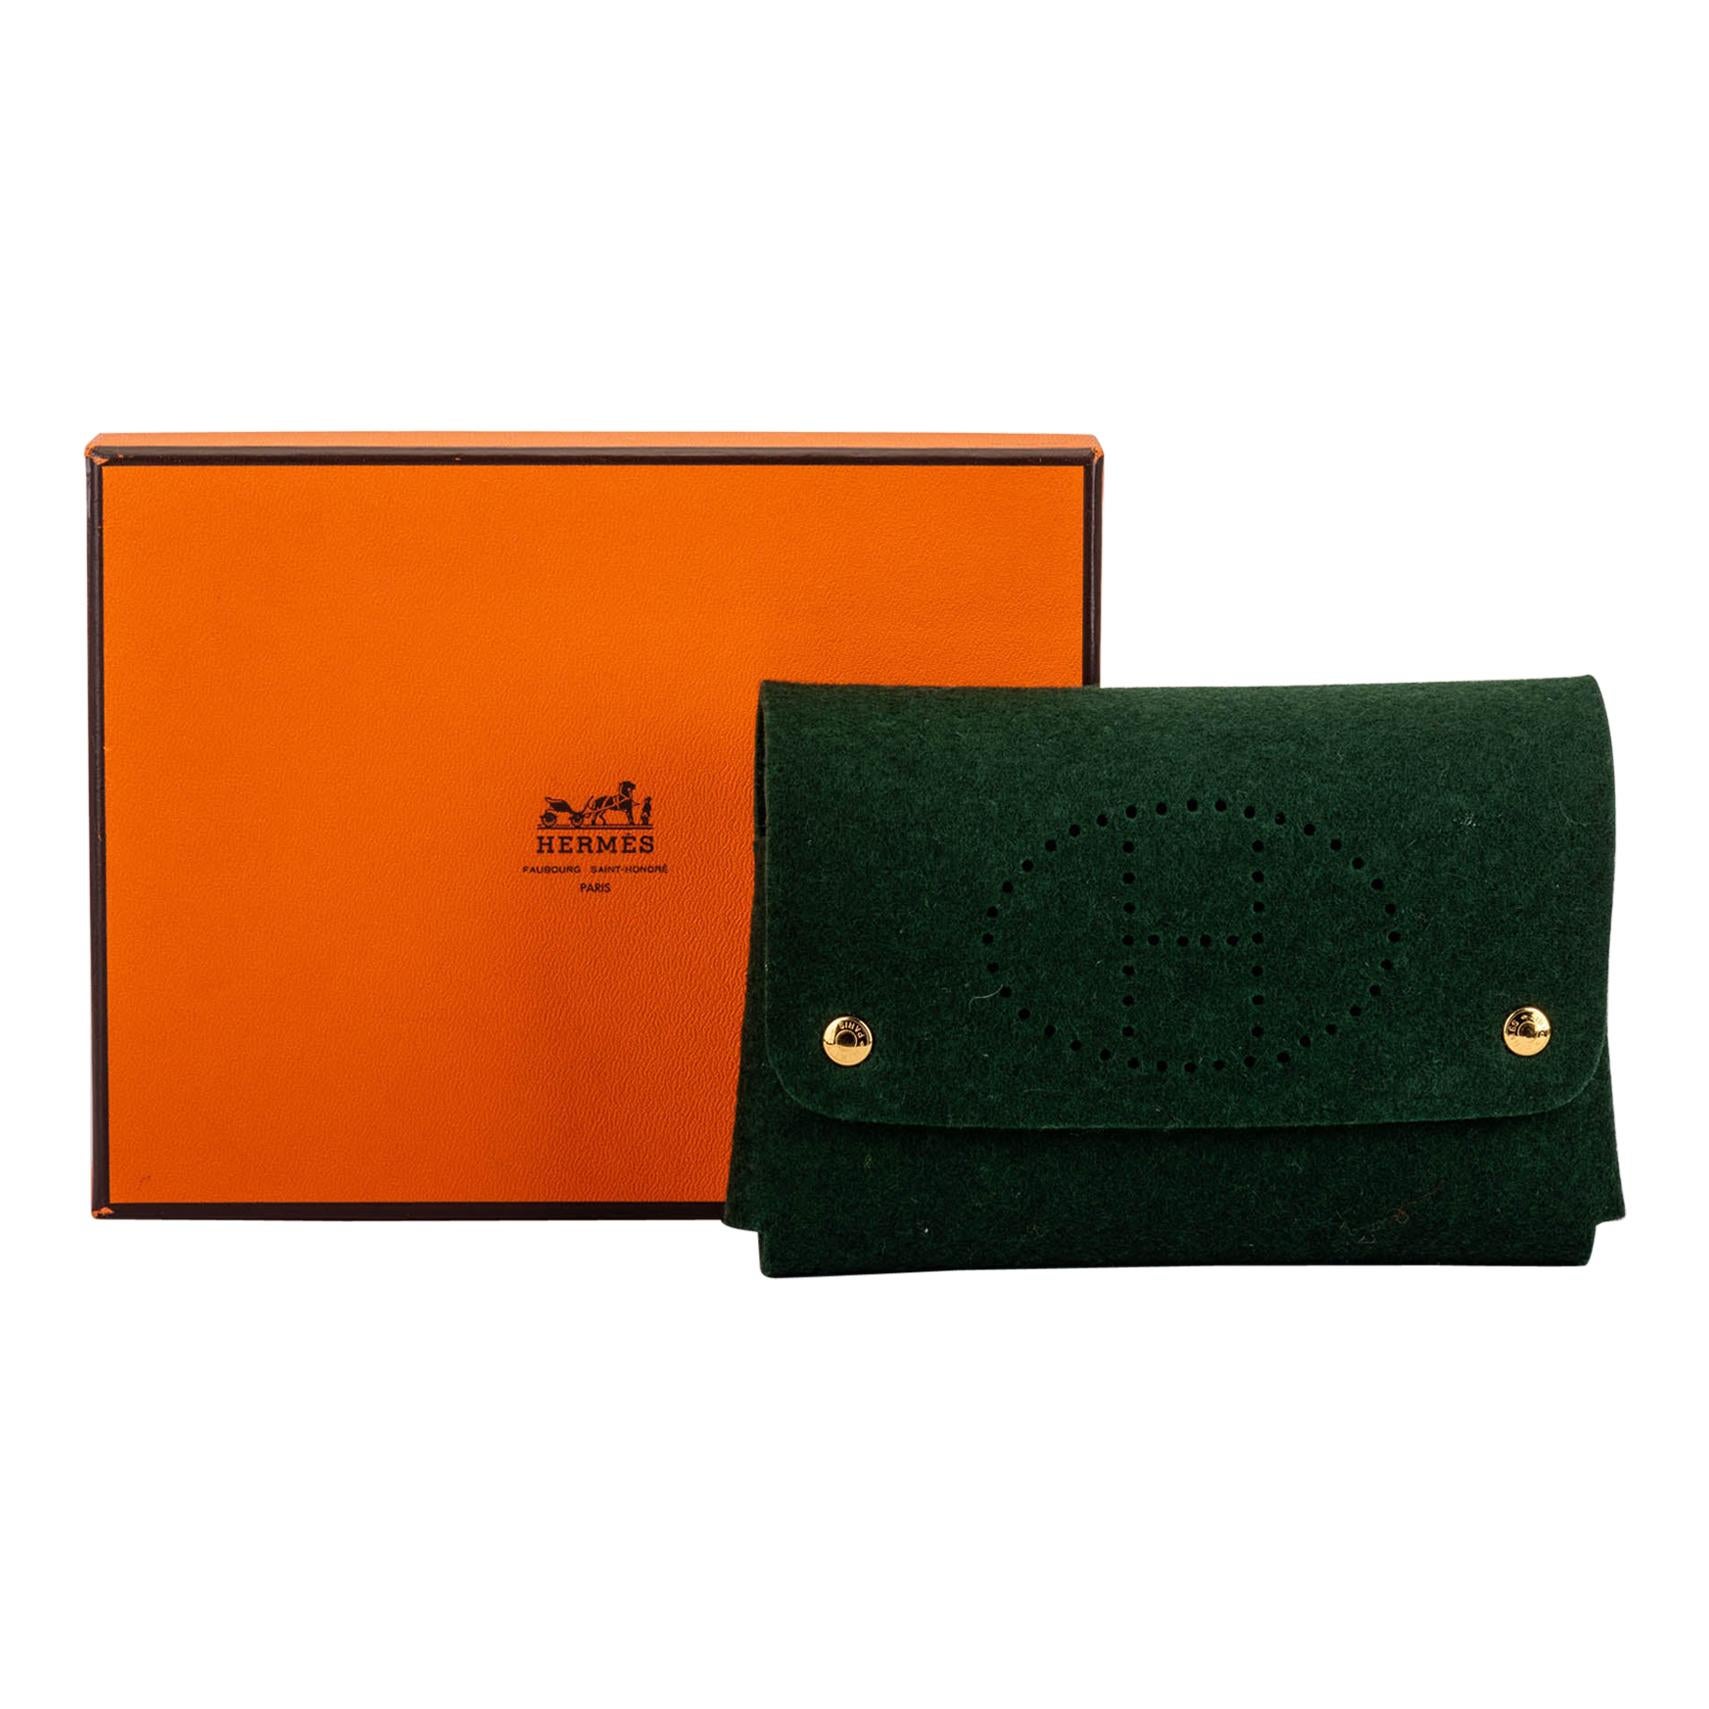 New in Box Hermès Green Perforated Felt Pouch